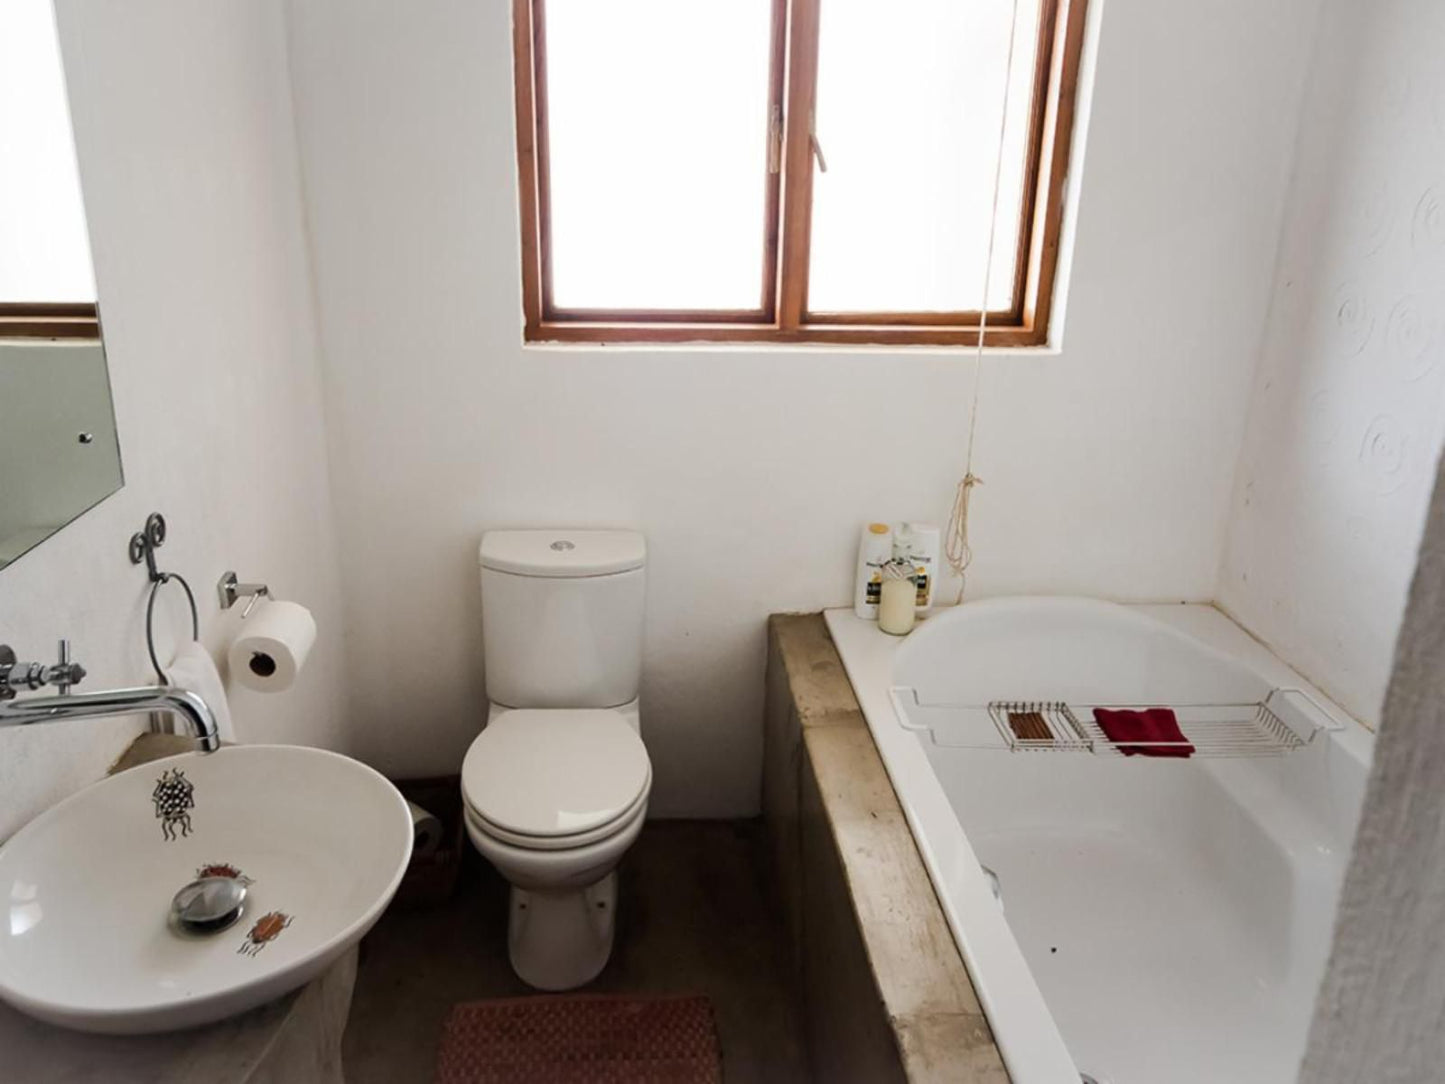 278 On Main Clarens Free State South Africa Unsaturated, Bathroom